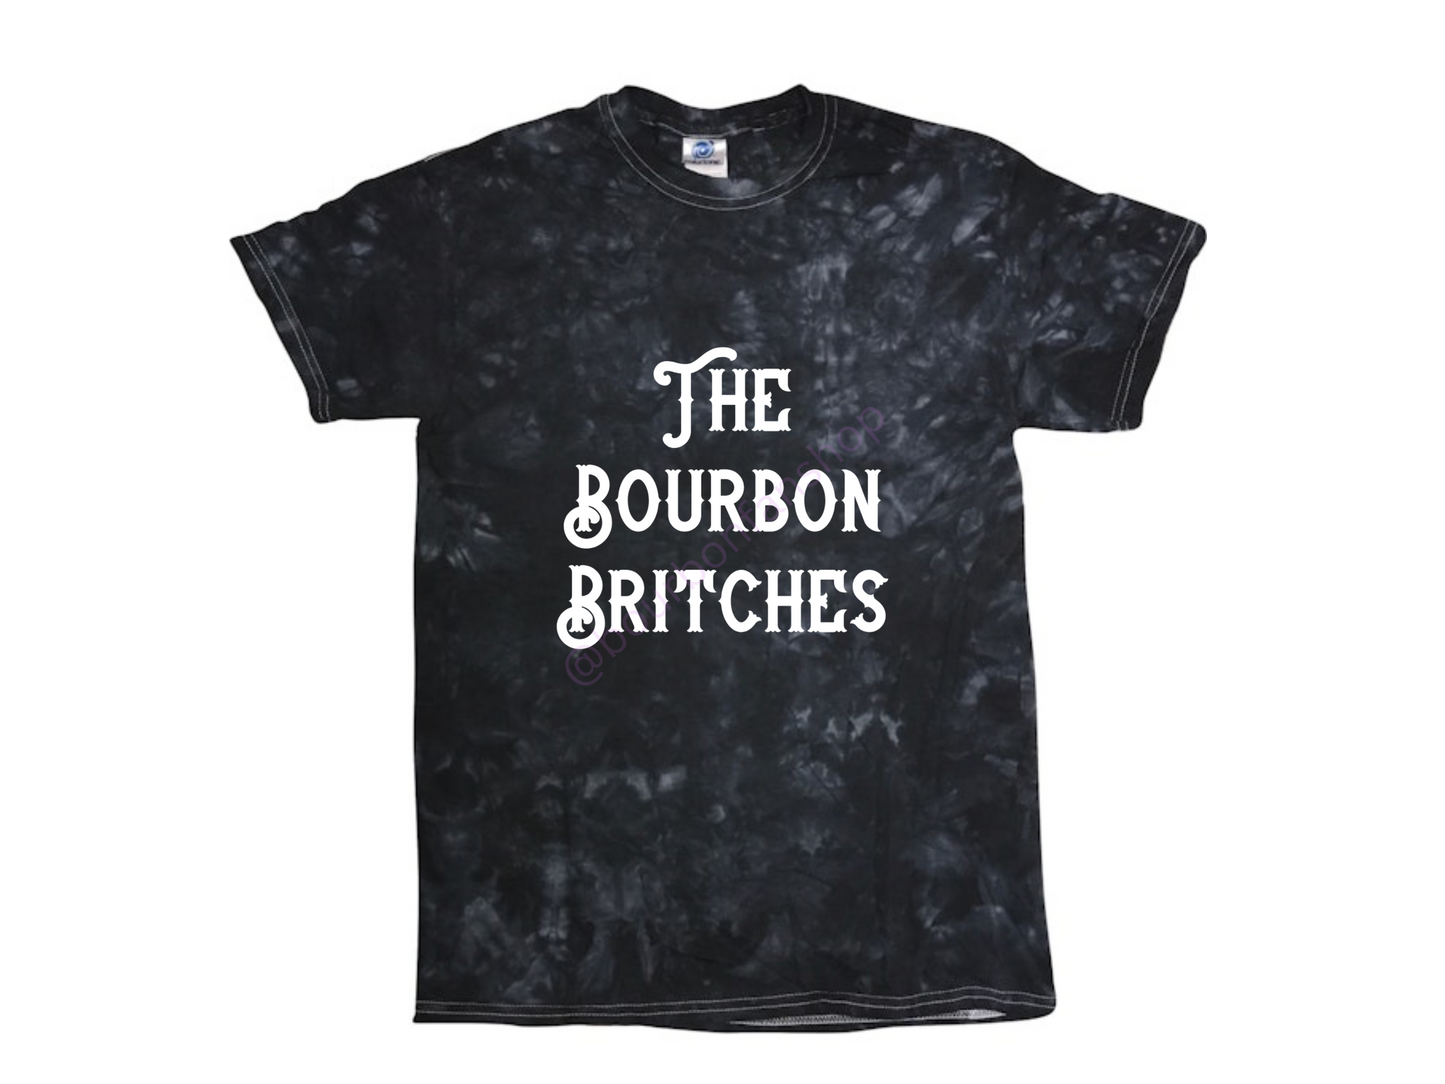 The Bourbon Britches fan TIE DYED shirt size Small-3X